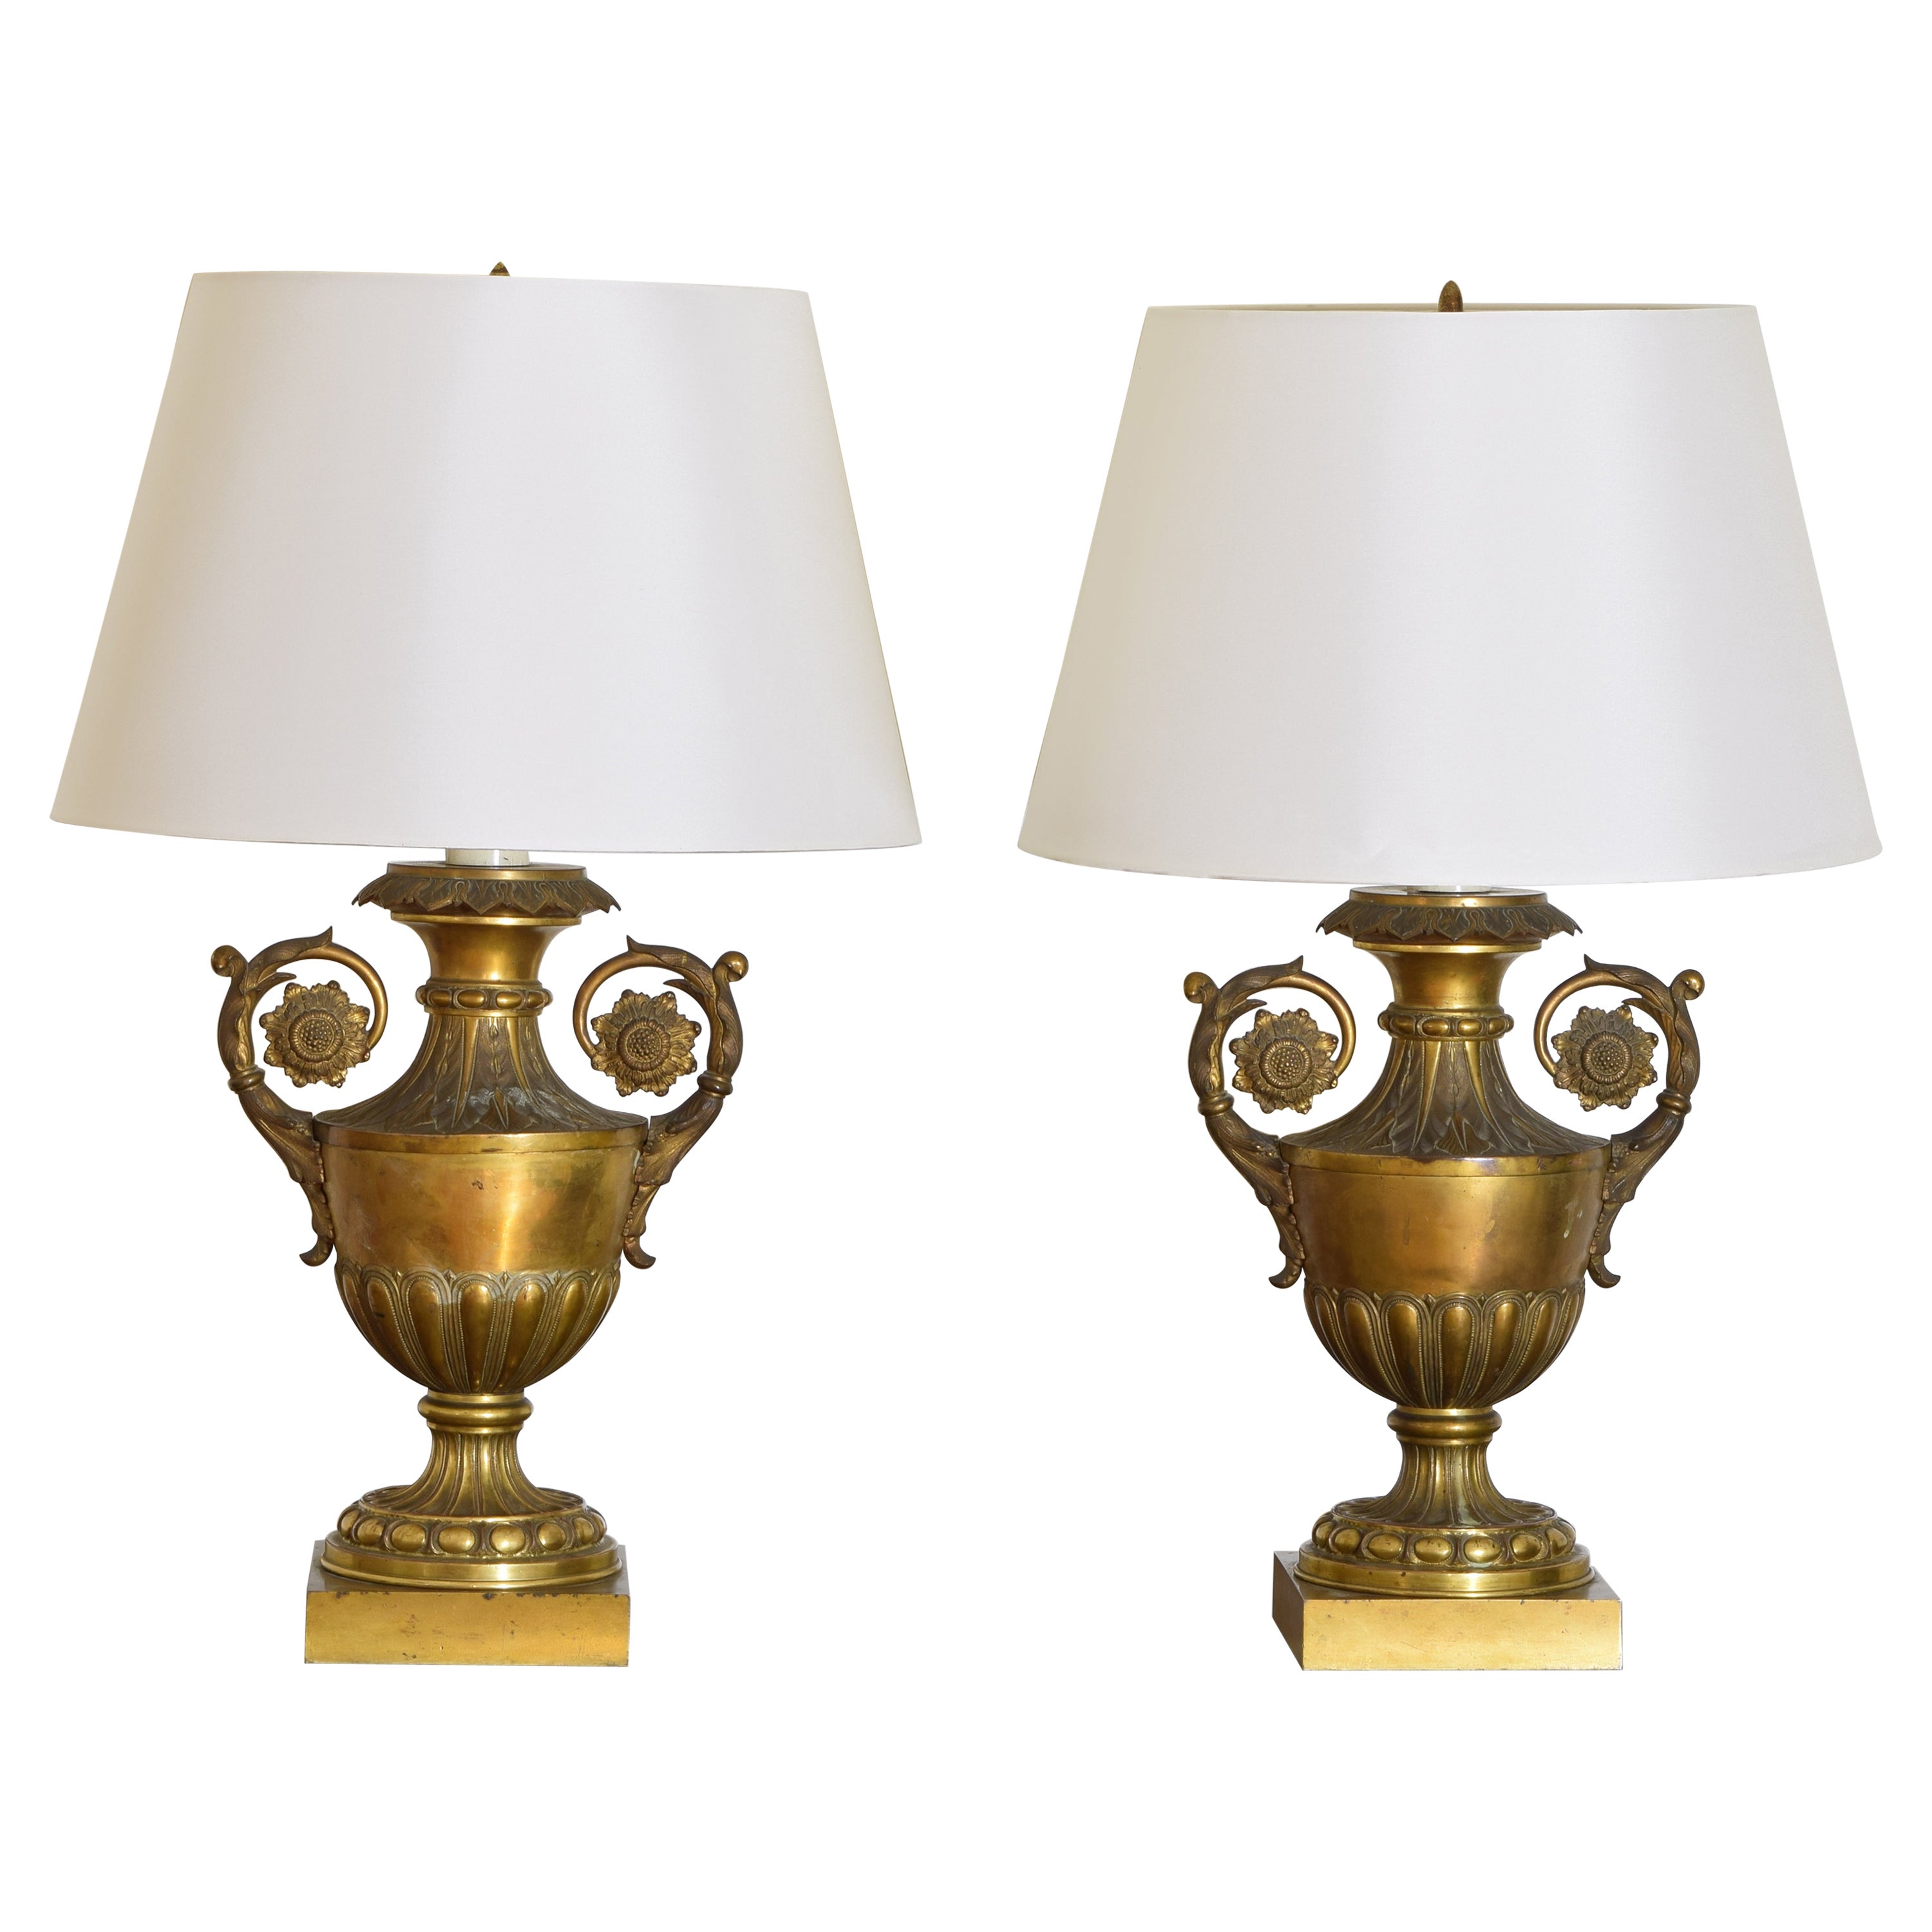 Pair of French Charles X Period Gilded Bronze Table Lamps, ca. 1825